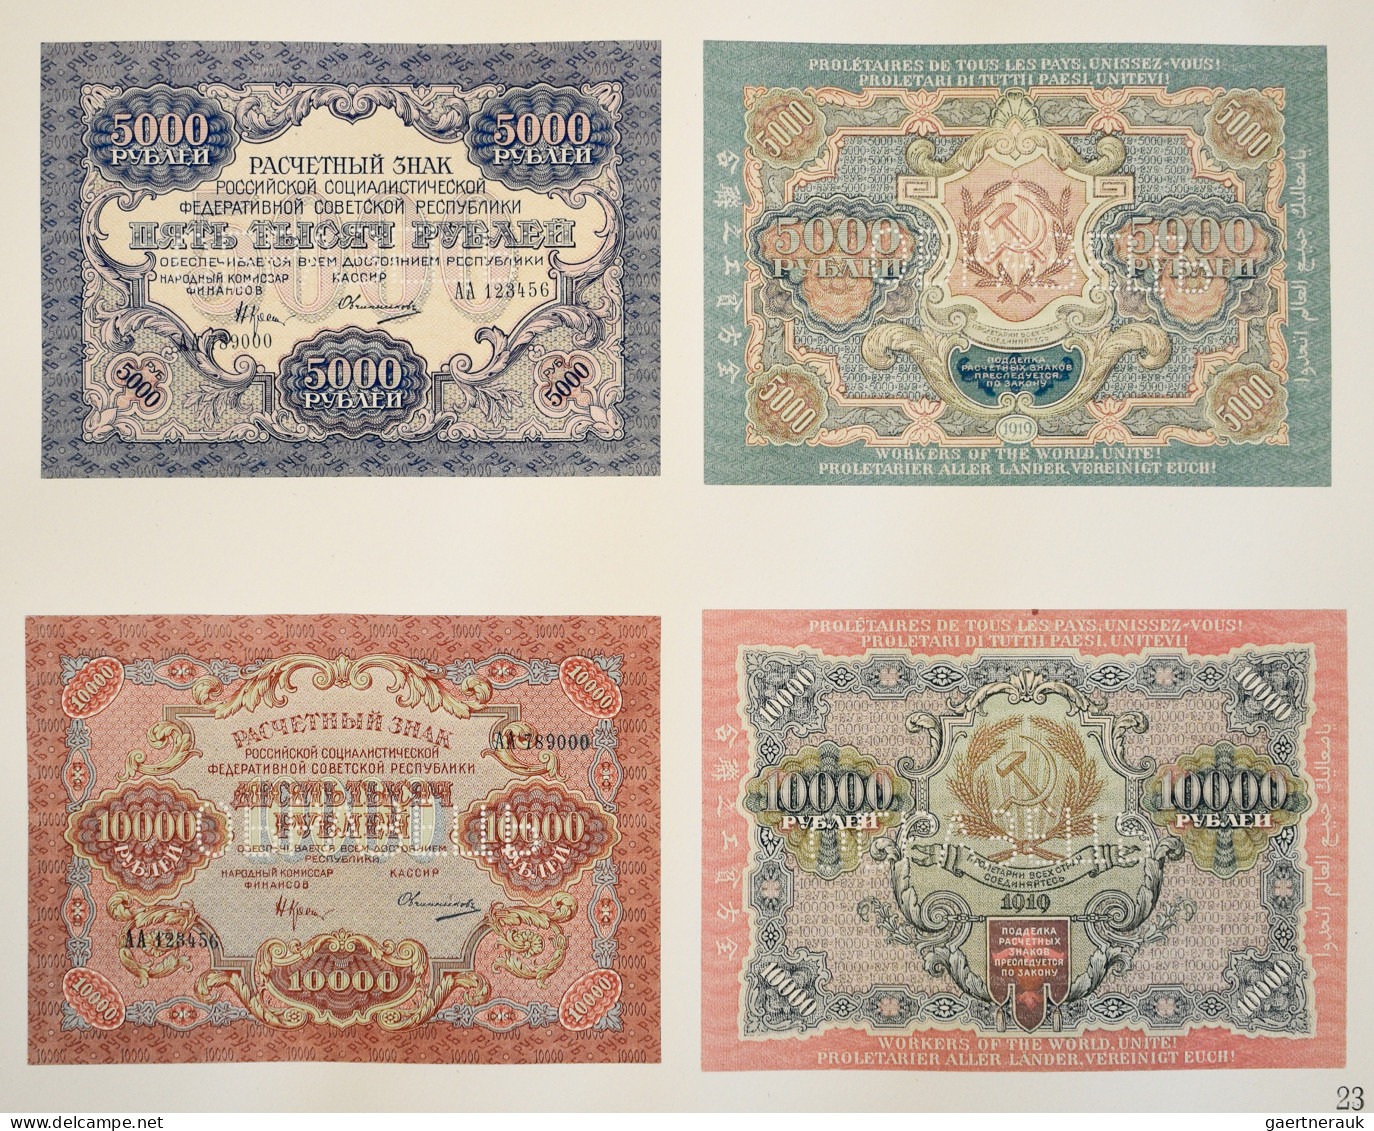 Russia - Bank Notes: Original archive album of the Russian banknote printing com